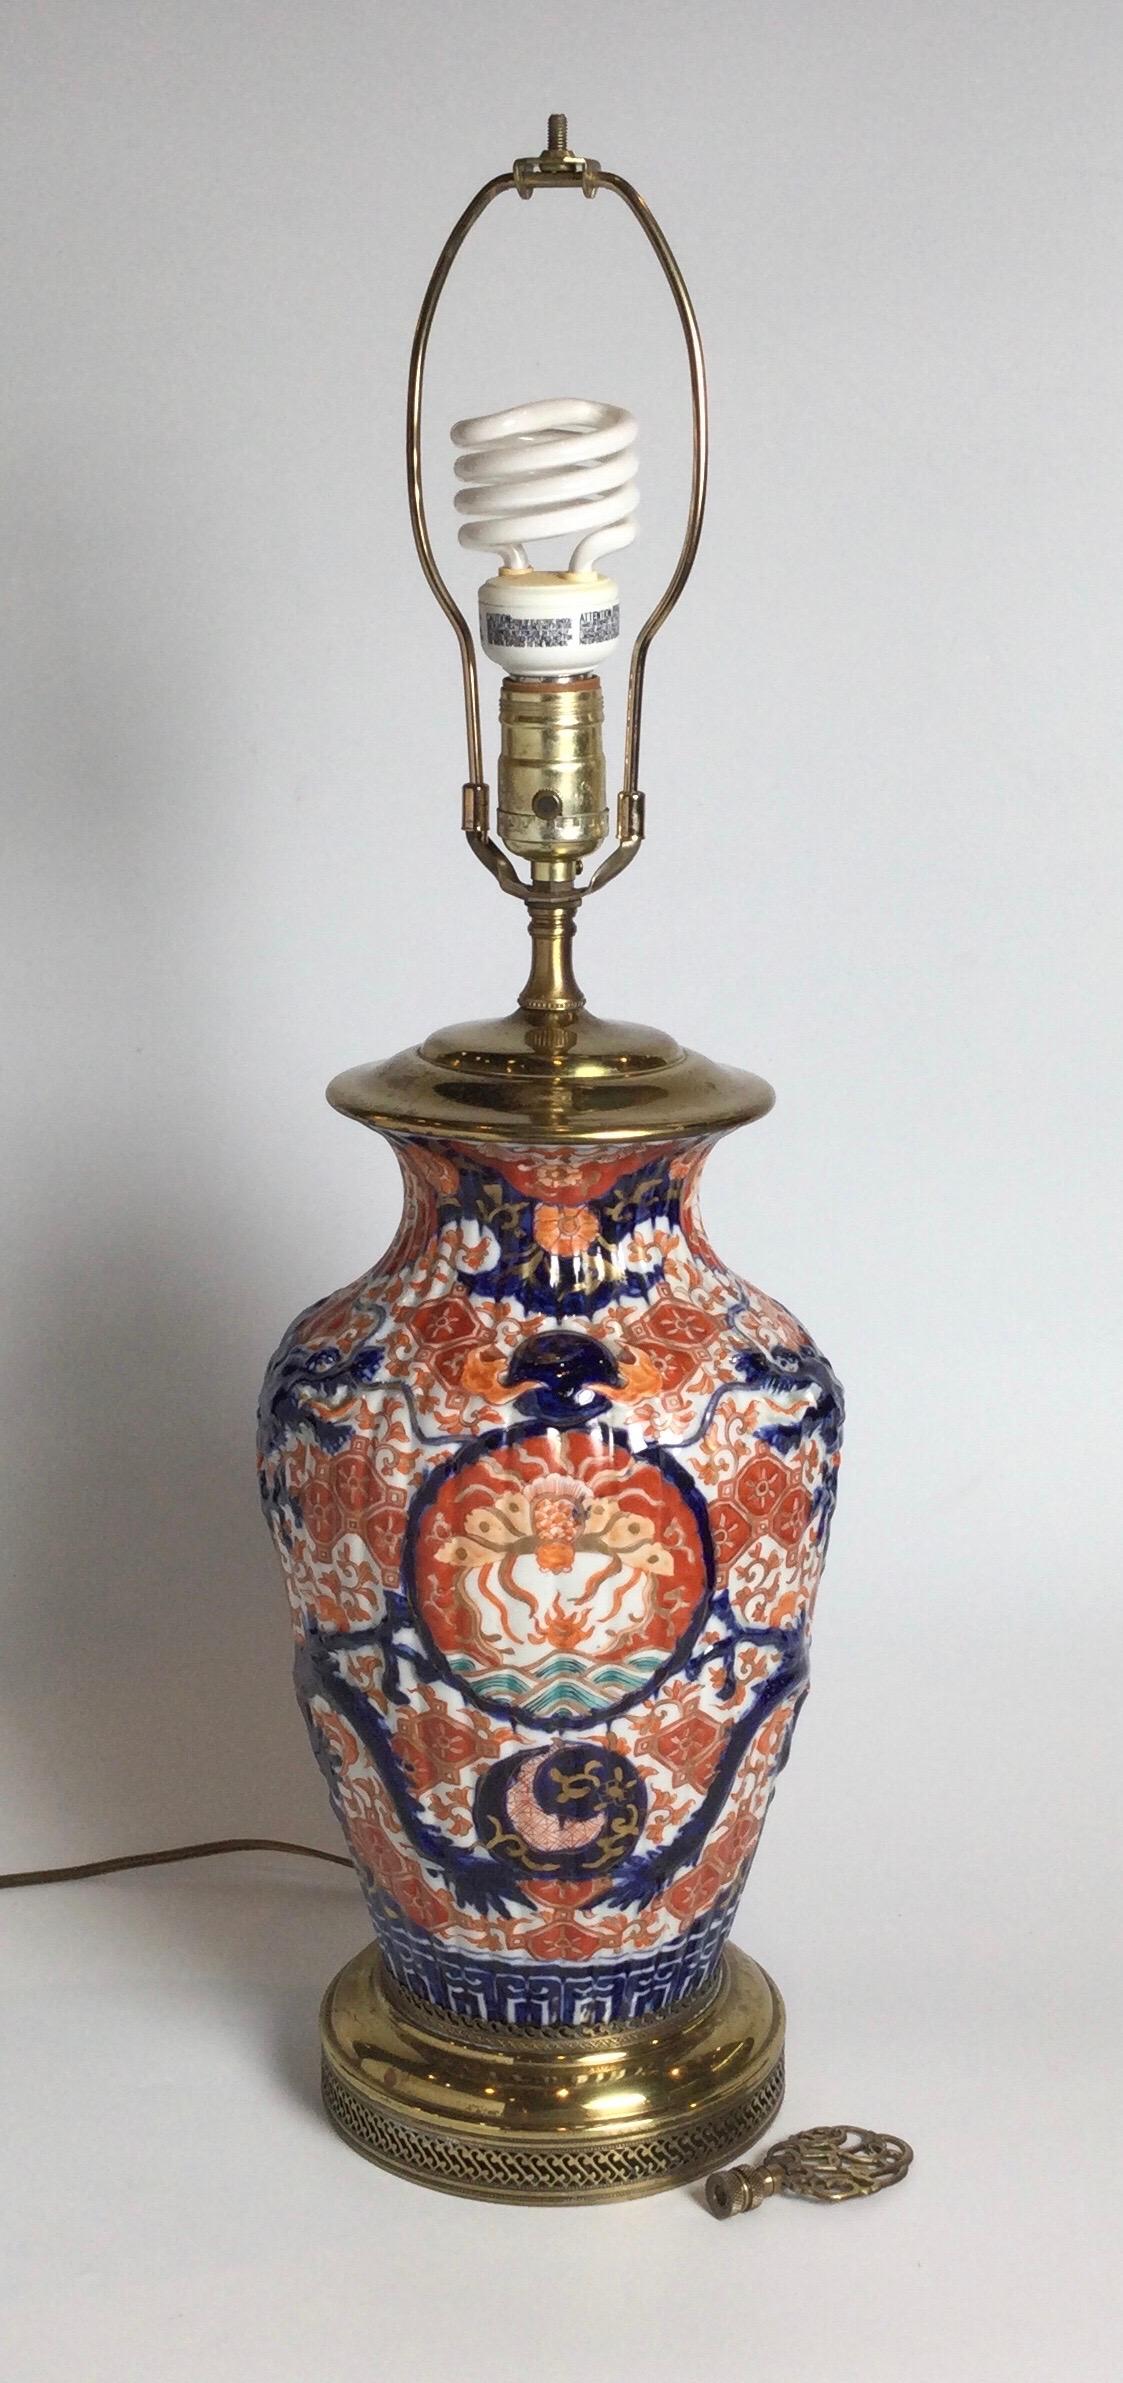 Classic iron red and cobalt blue Imari Porcelain vase now as a lamp/ The circa 1900 Japanese vase, handprinted in the traditional colors, electrified probably in the 1920's. The shade is for photographic purposes only and not included. 22 inches to